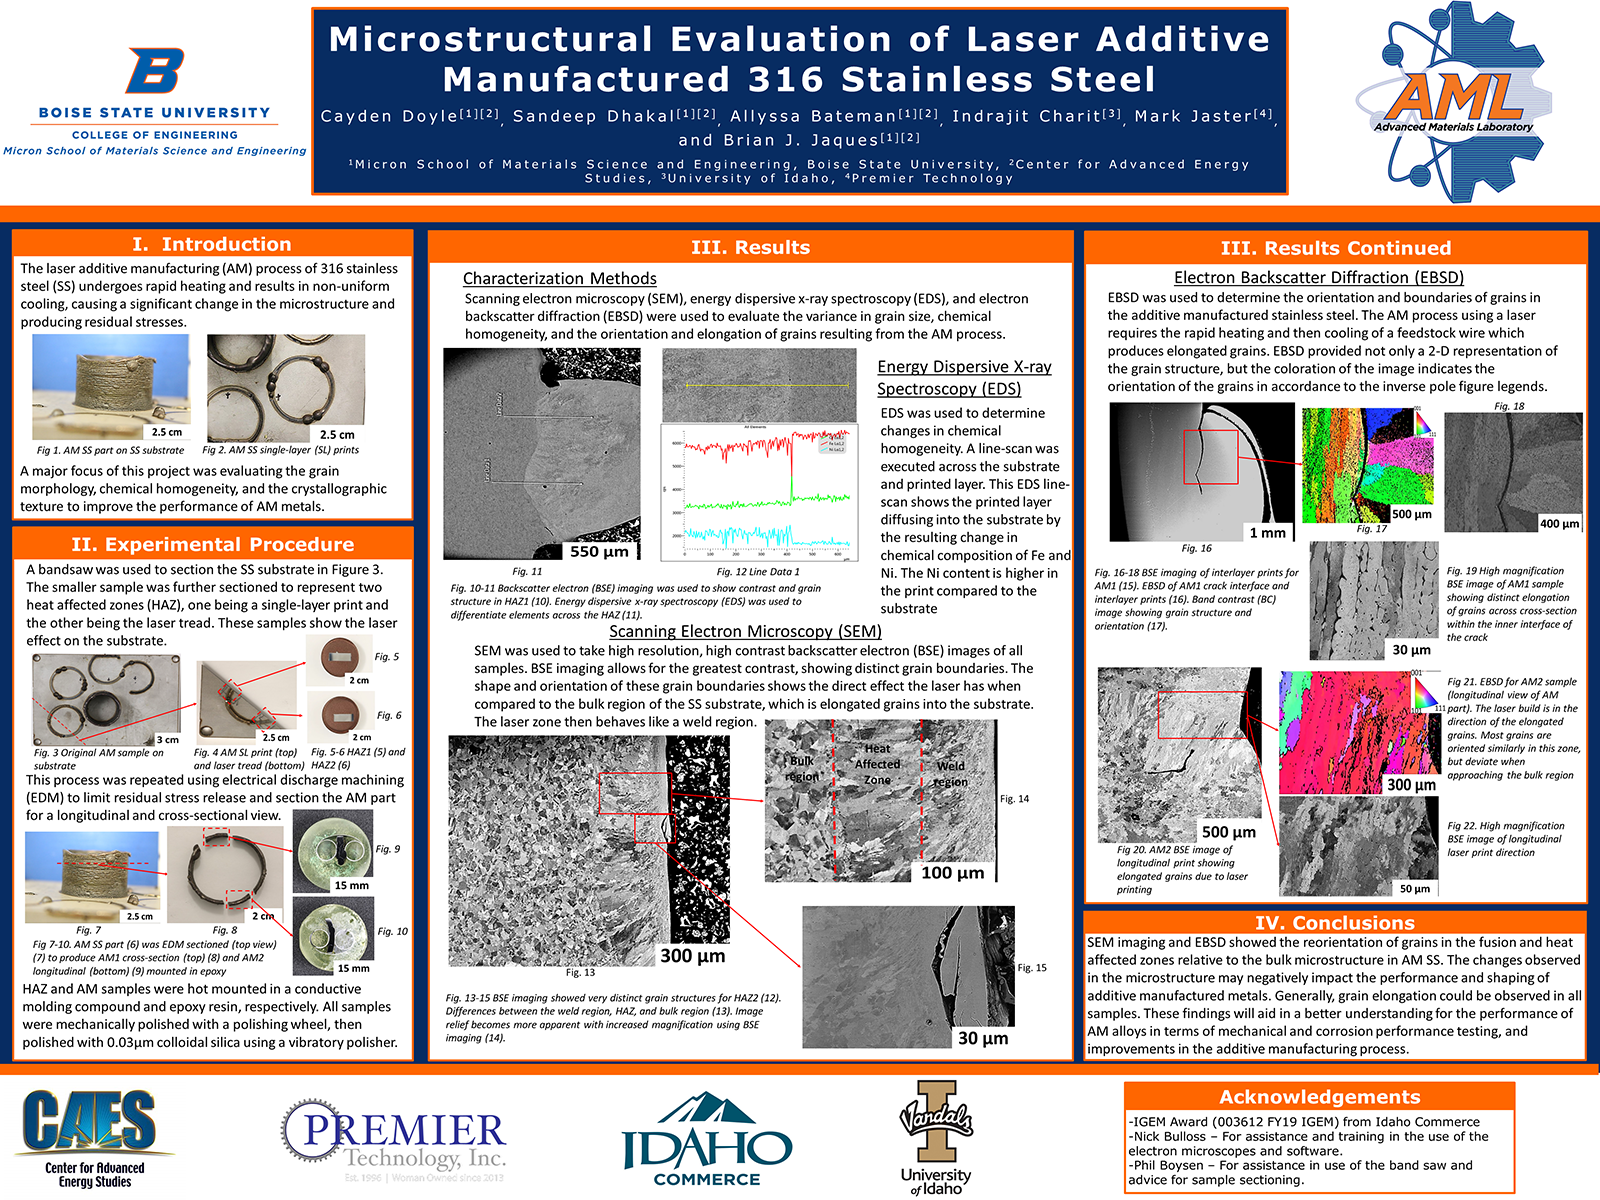 Microstructural Evaluation of Laser Additive Manufactured 316 Stainless Steel research poster